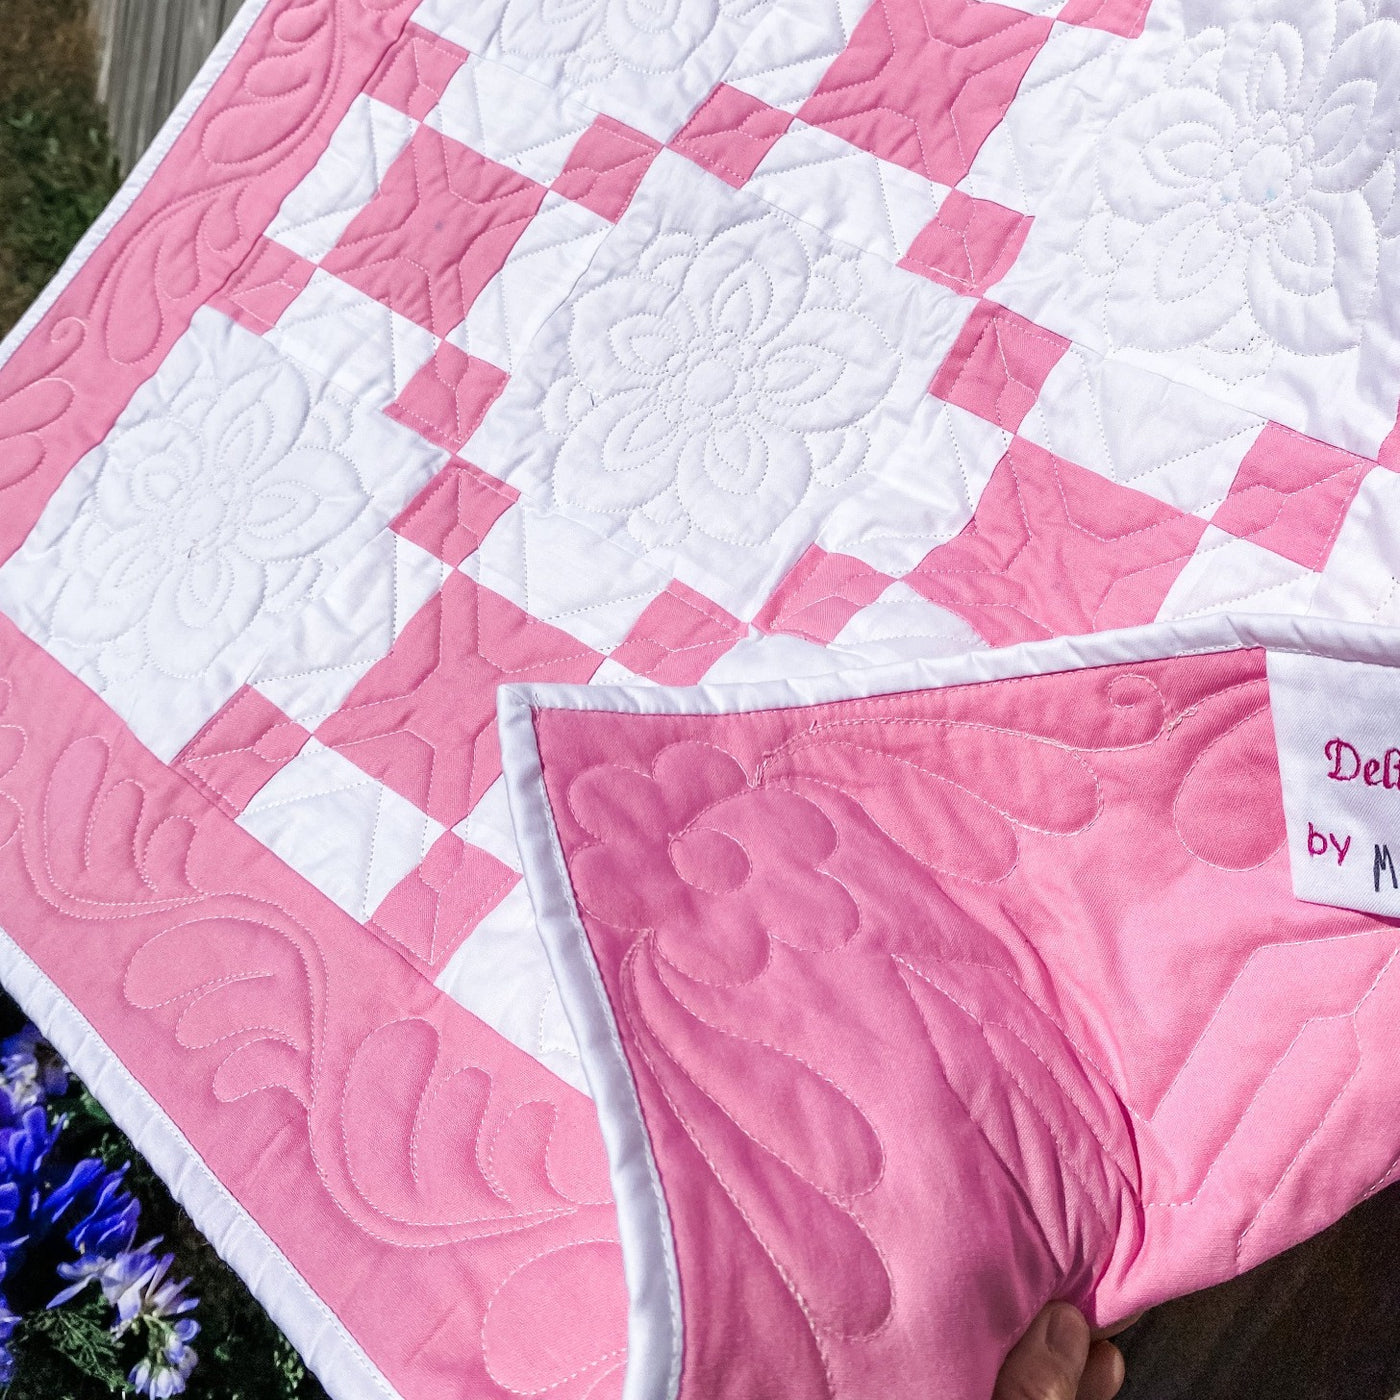 A handmade, heirloom, patchwork of pink nine patch with white background fabric, white backing, 100% cotton batting, Floral top quilting in the white centers, X's in the 9 patch squares, and feathers along the borders, machine top stitched binding, on this crib size quilt